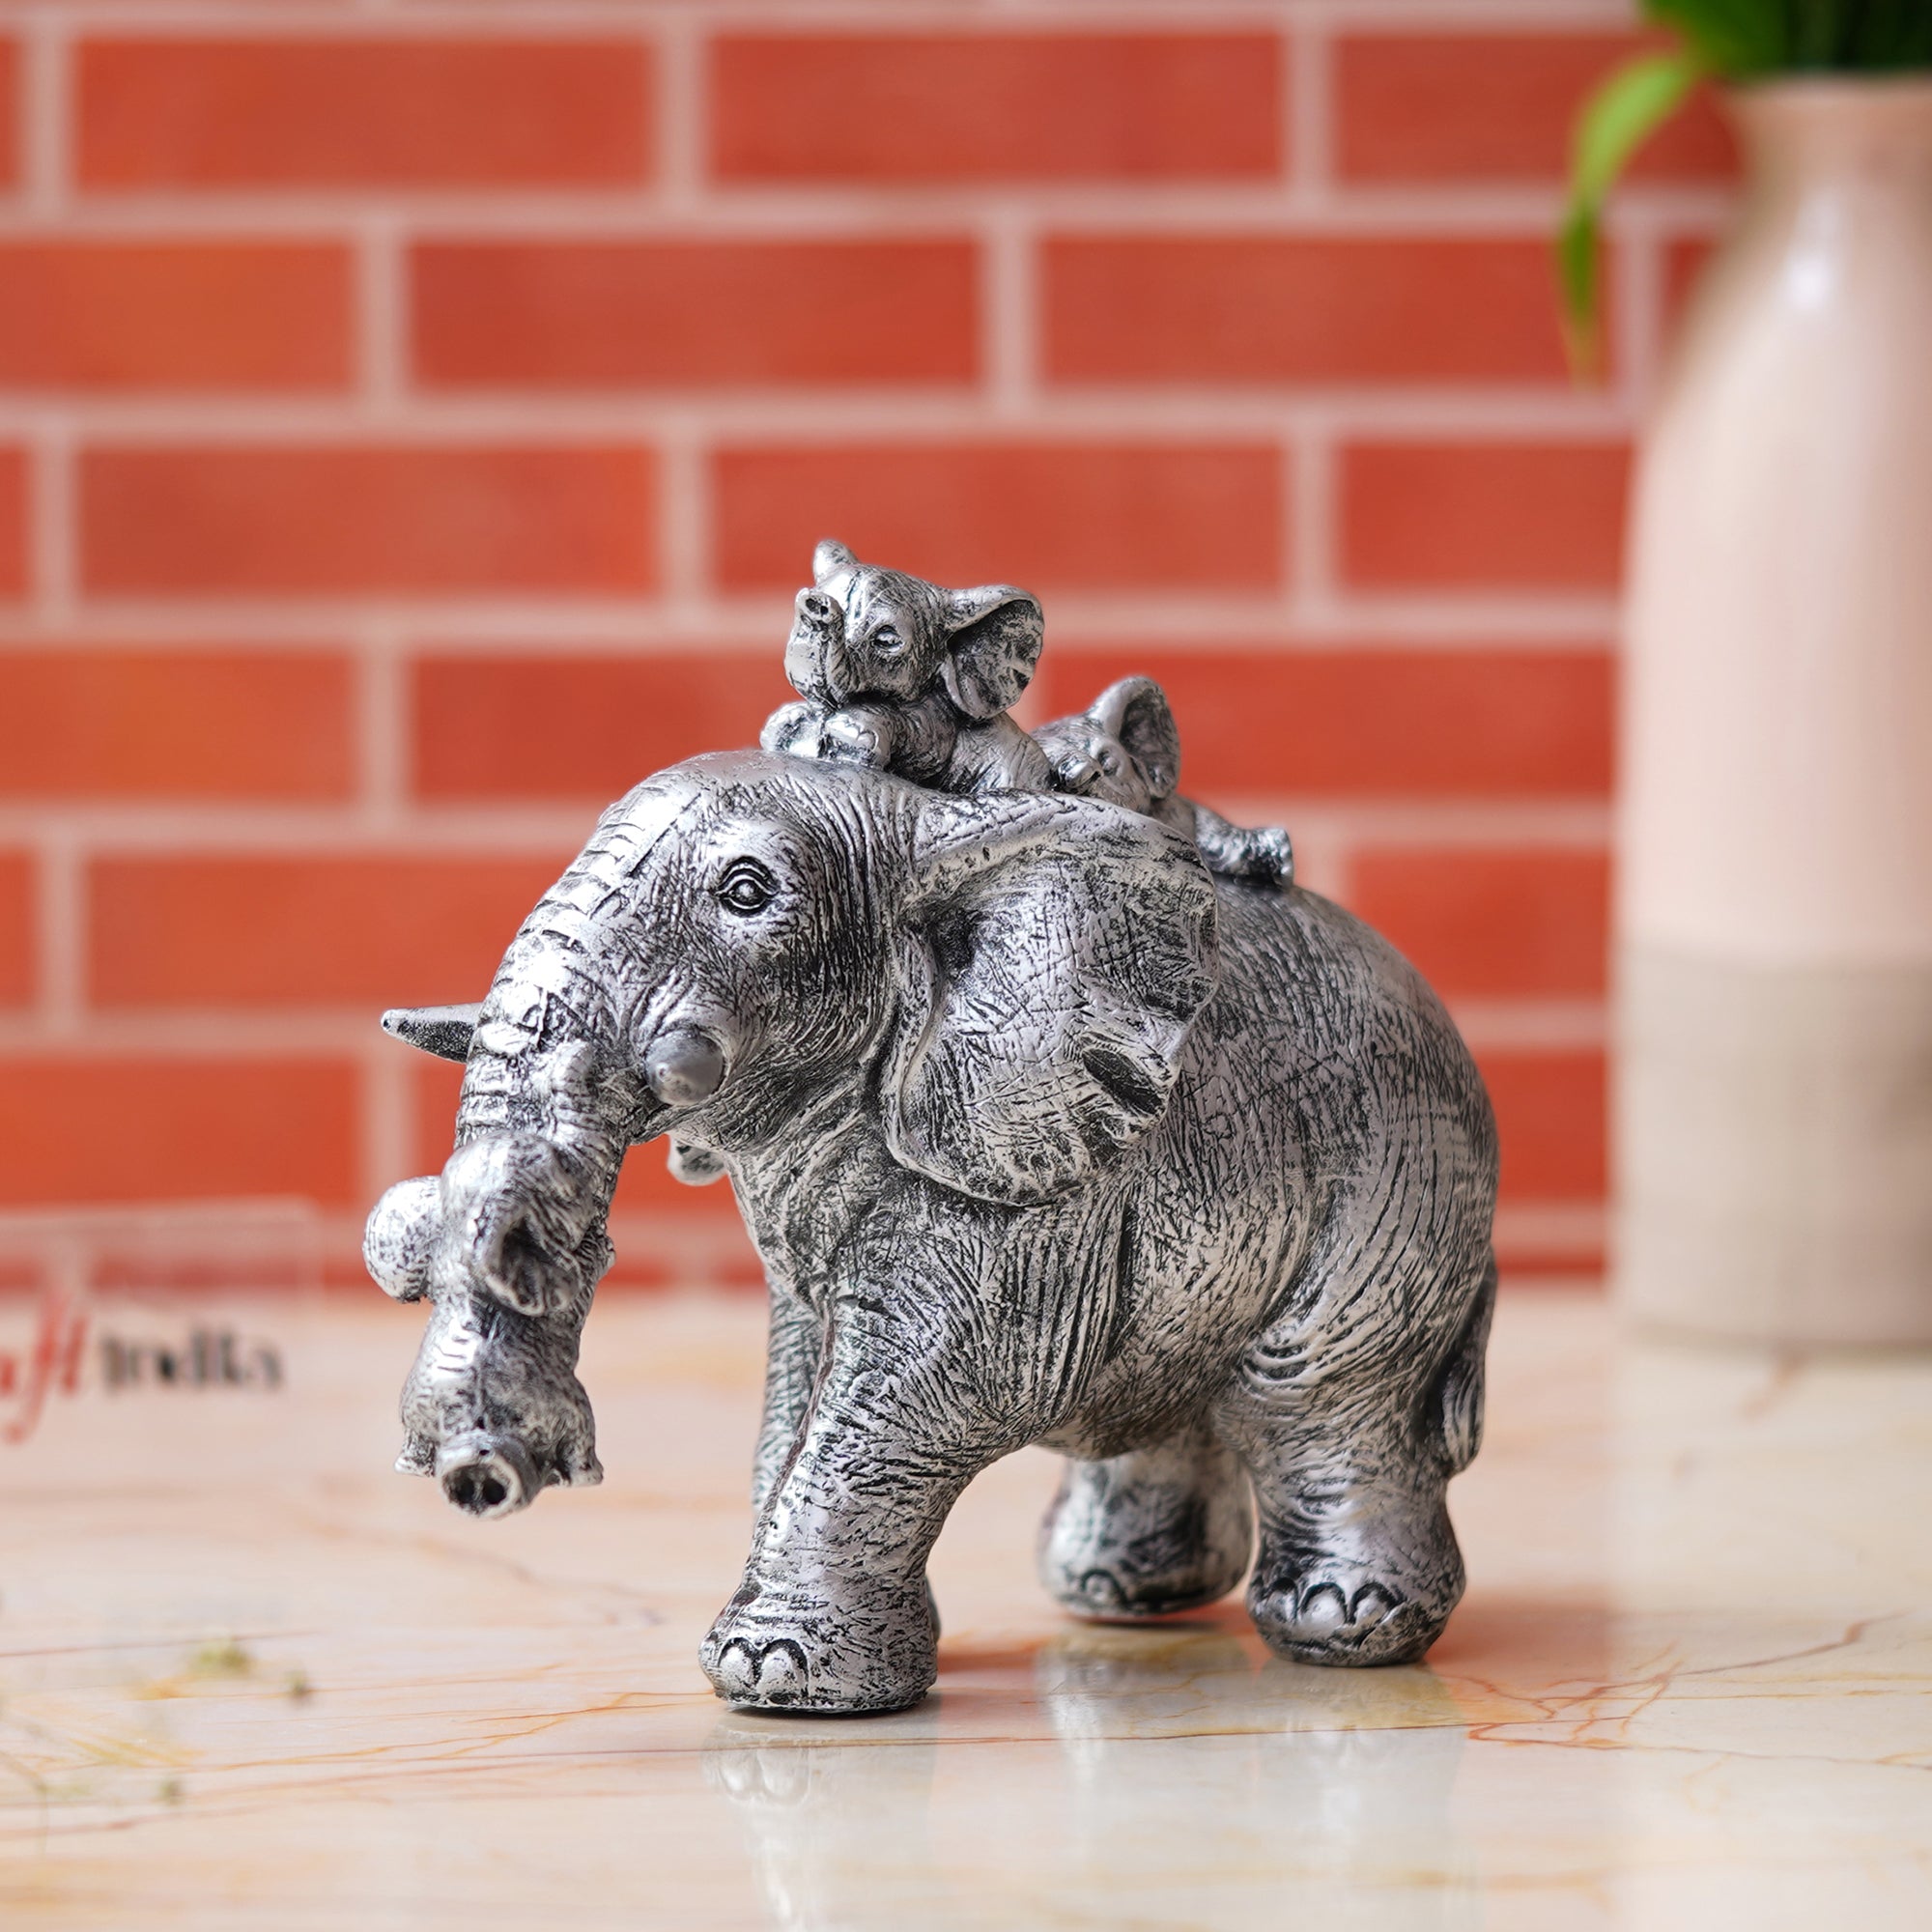 Cute Silver Elephant Statue Carries Three Calves on Its Back and Trunk 4